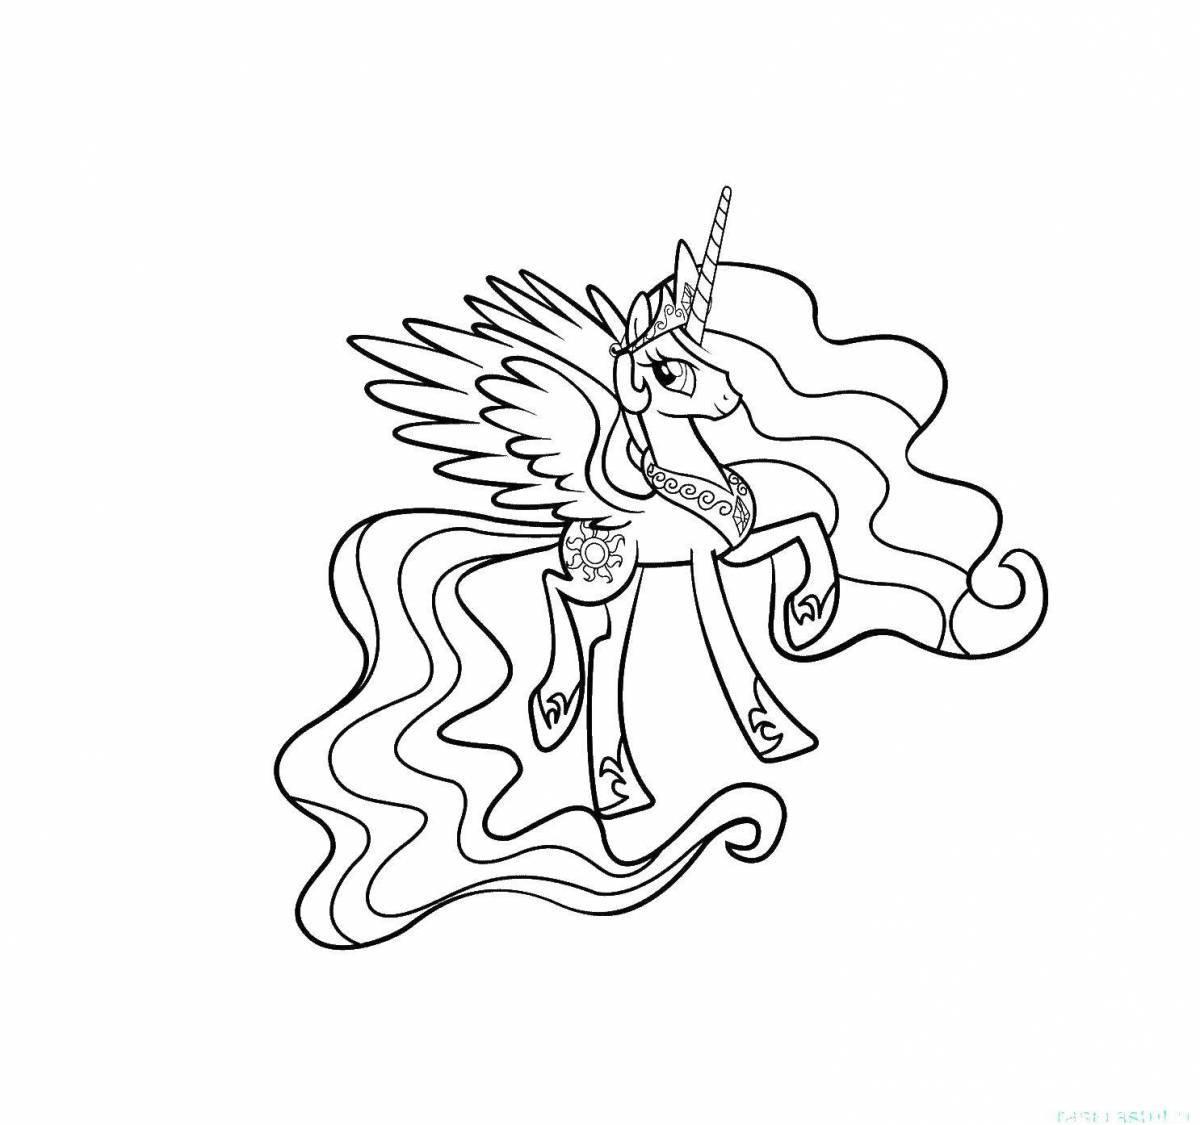 Awesome moon princess coloring page